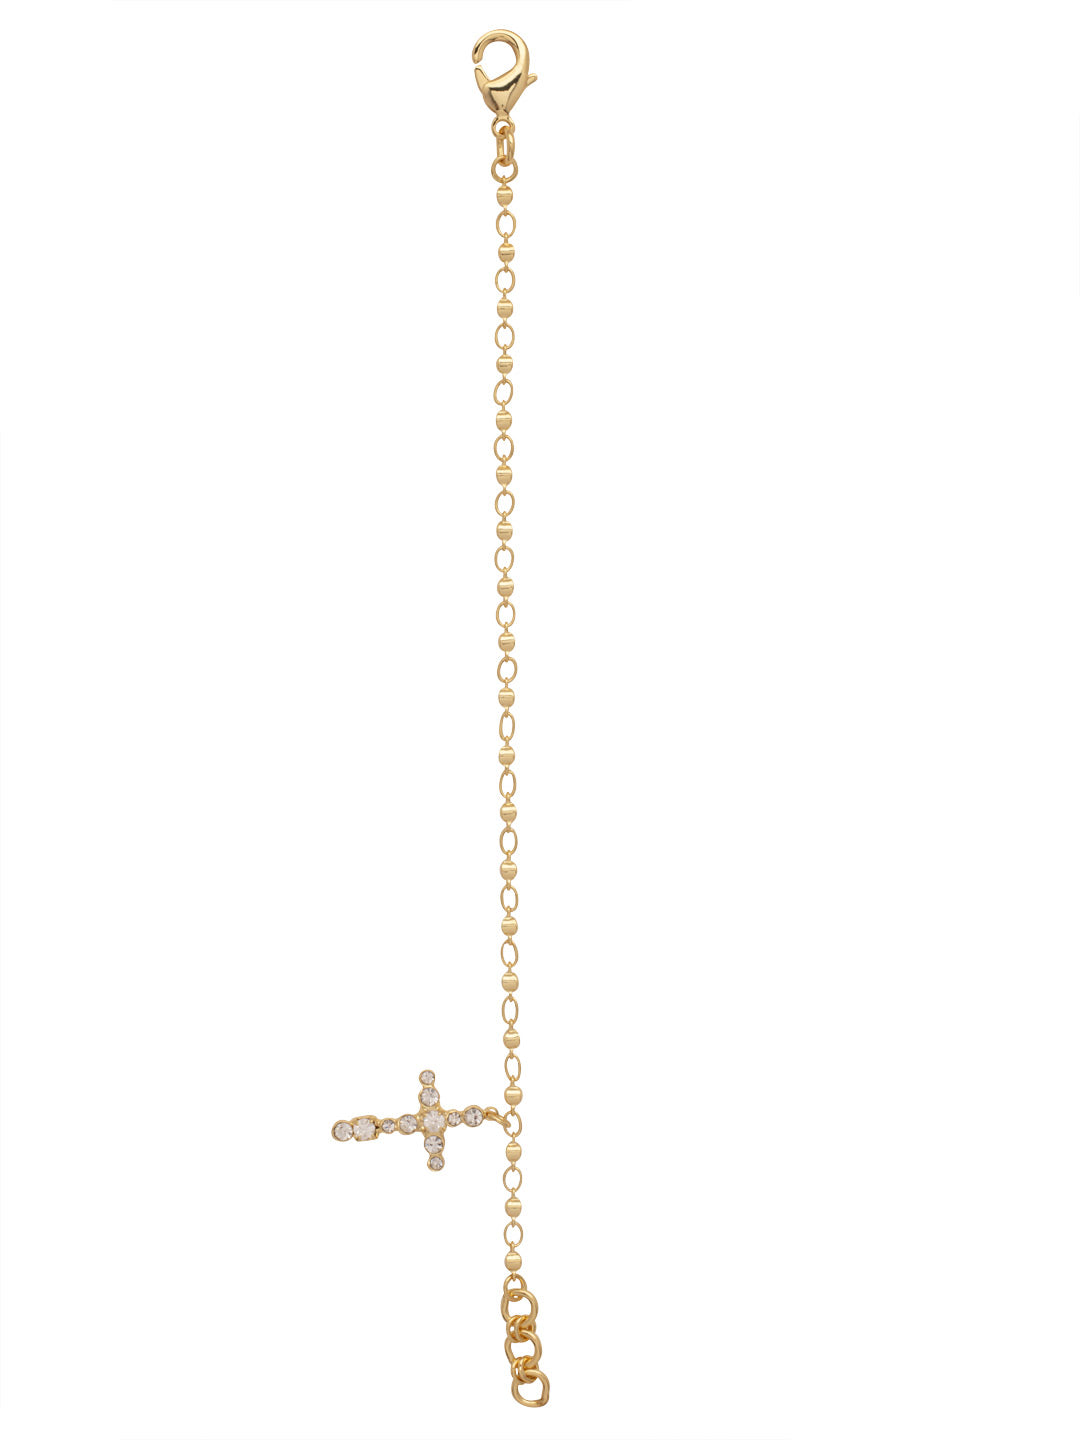 Miley Cross Charm Bracelet - BEX2BGCRY - <p>The Miley Cross Charm Bracelet features a crystal cross charm on a decorative link chain, perfect for wearing alone or layered with other bracelets. From Sorrelli's Crystal collection in our Bright Gold-tone finish.</p>